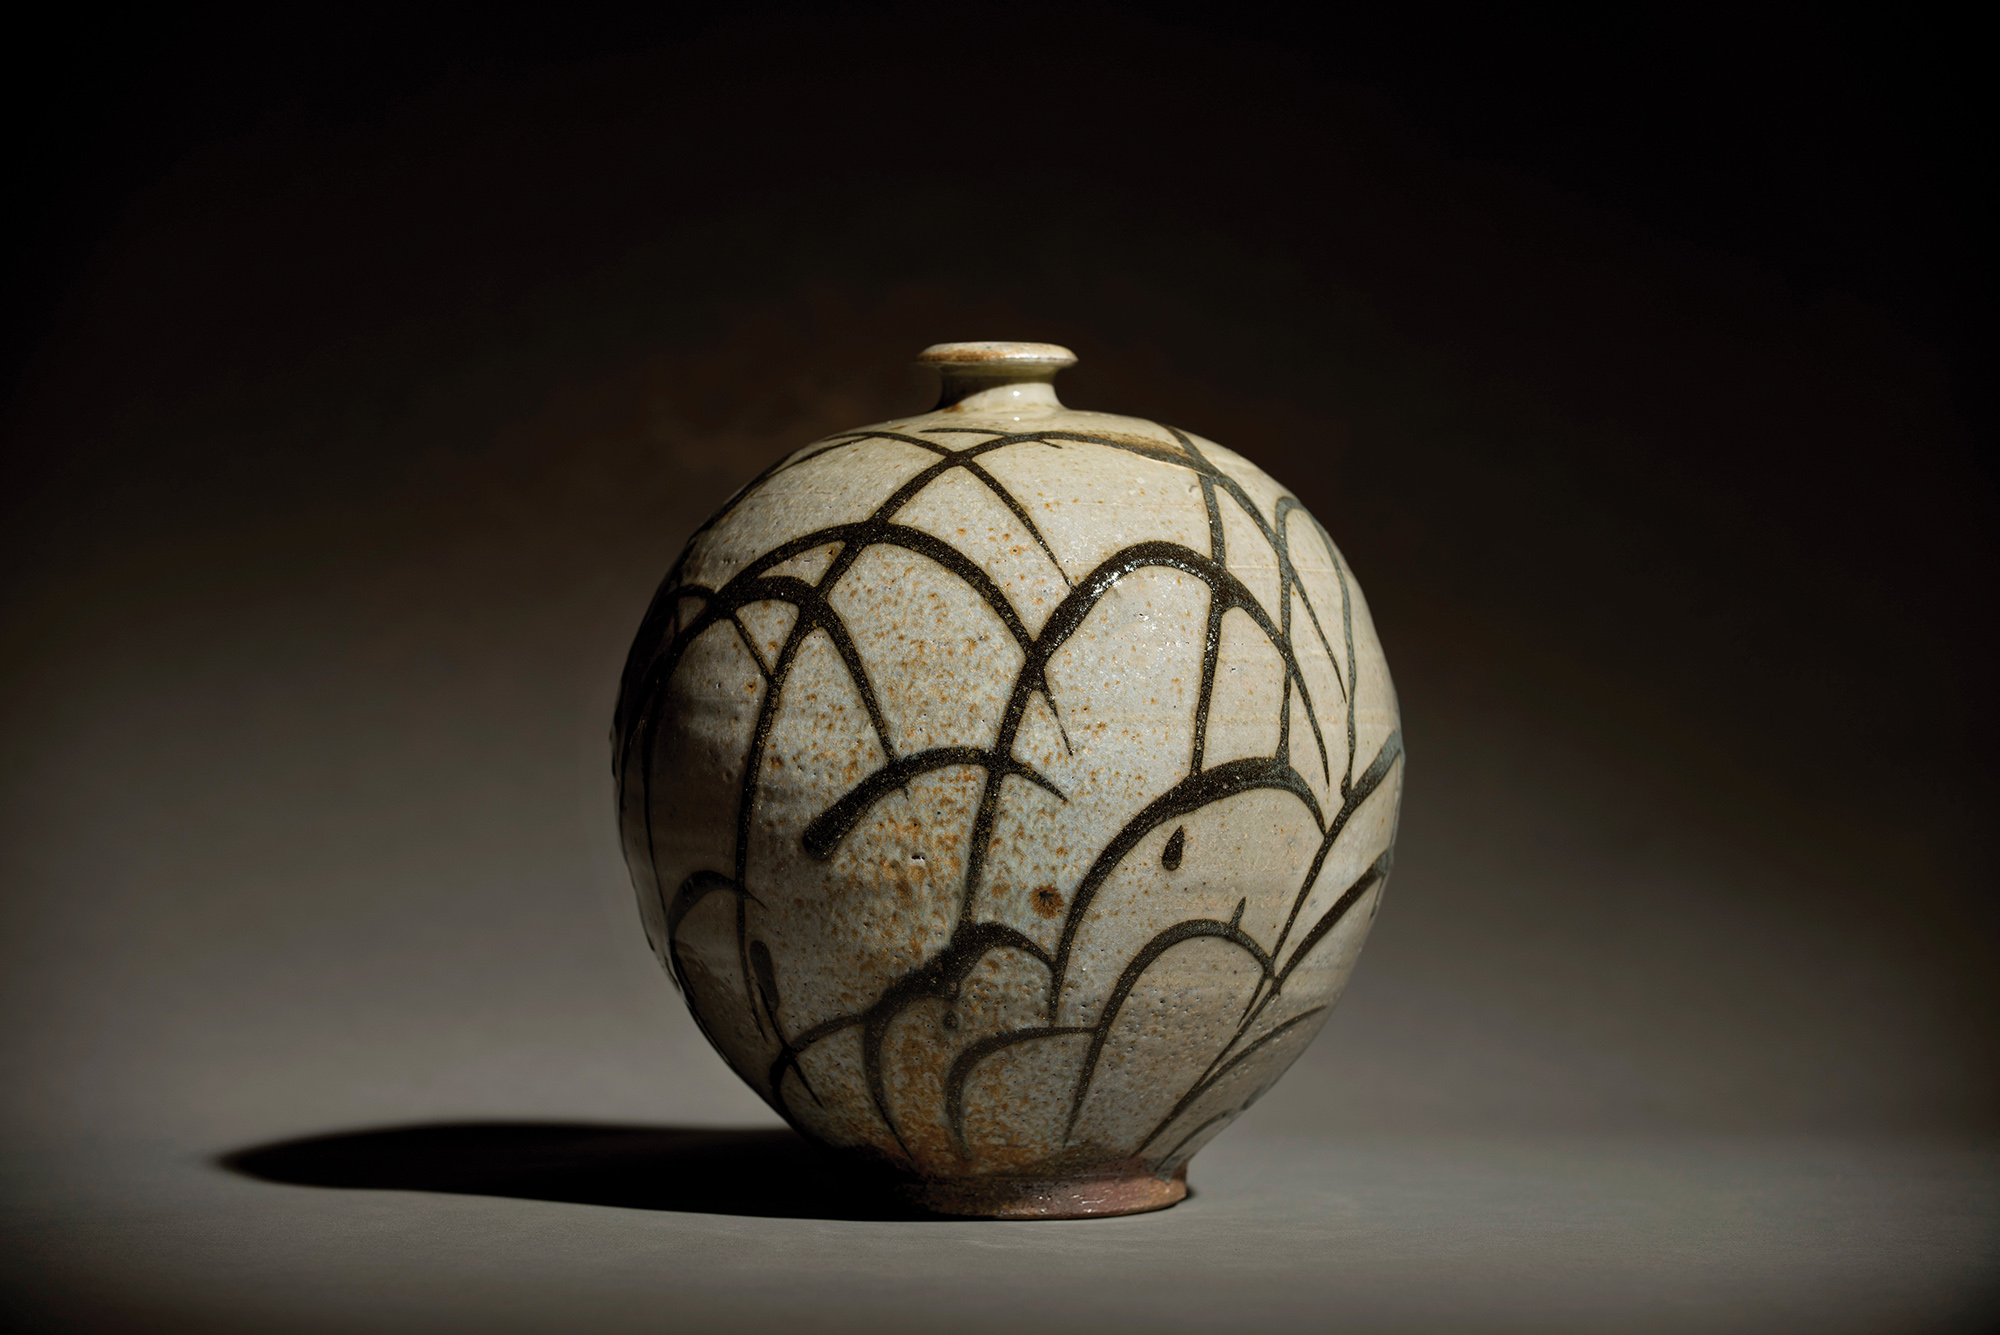 Willi Singleton. Woodfired Vase with Grass Pattern, 2017. Hawk Mountain and Chesapeake clays, white slip, creek clay, wood ash glaze. 8.5 x 8 x 8 in. Photograph by KenEk Photography.